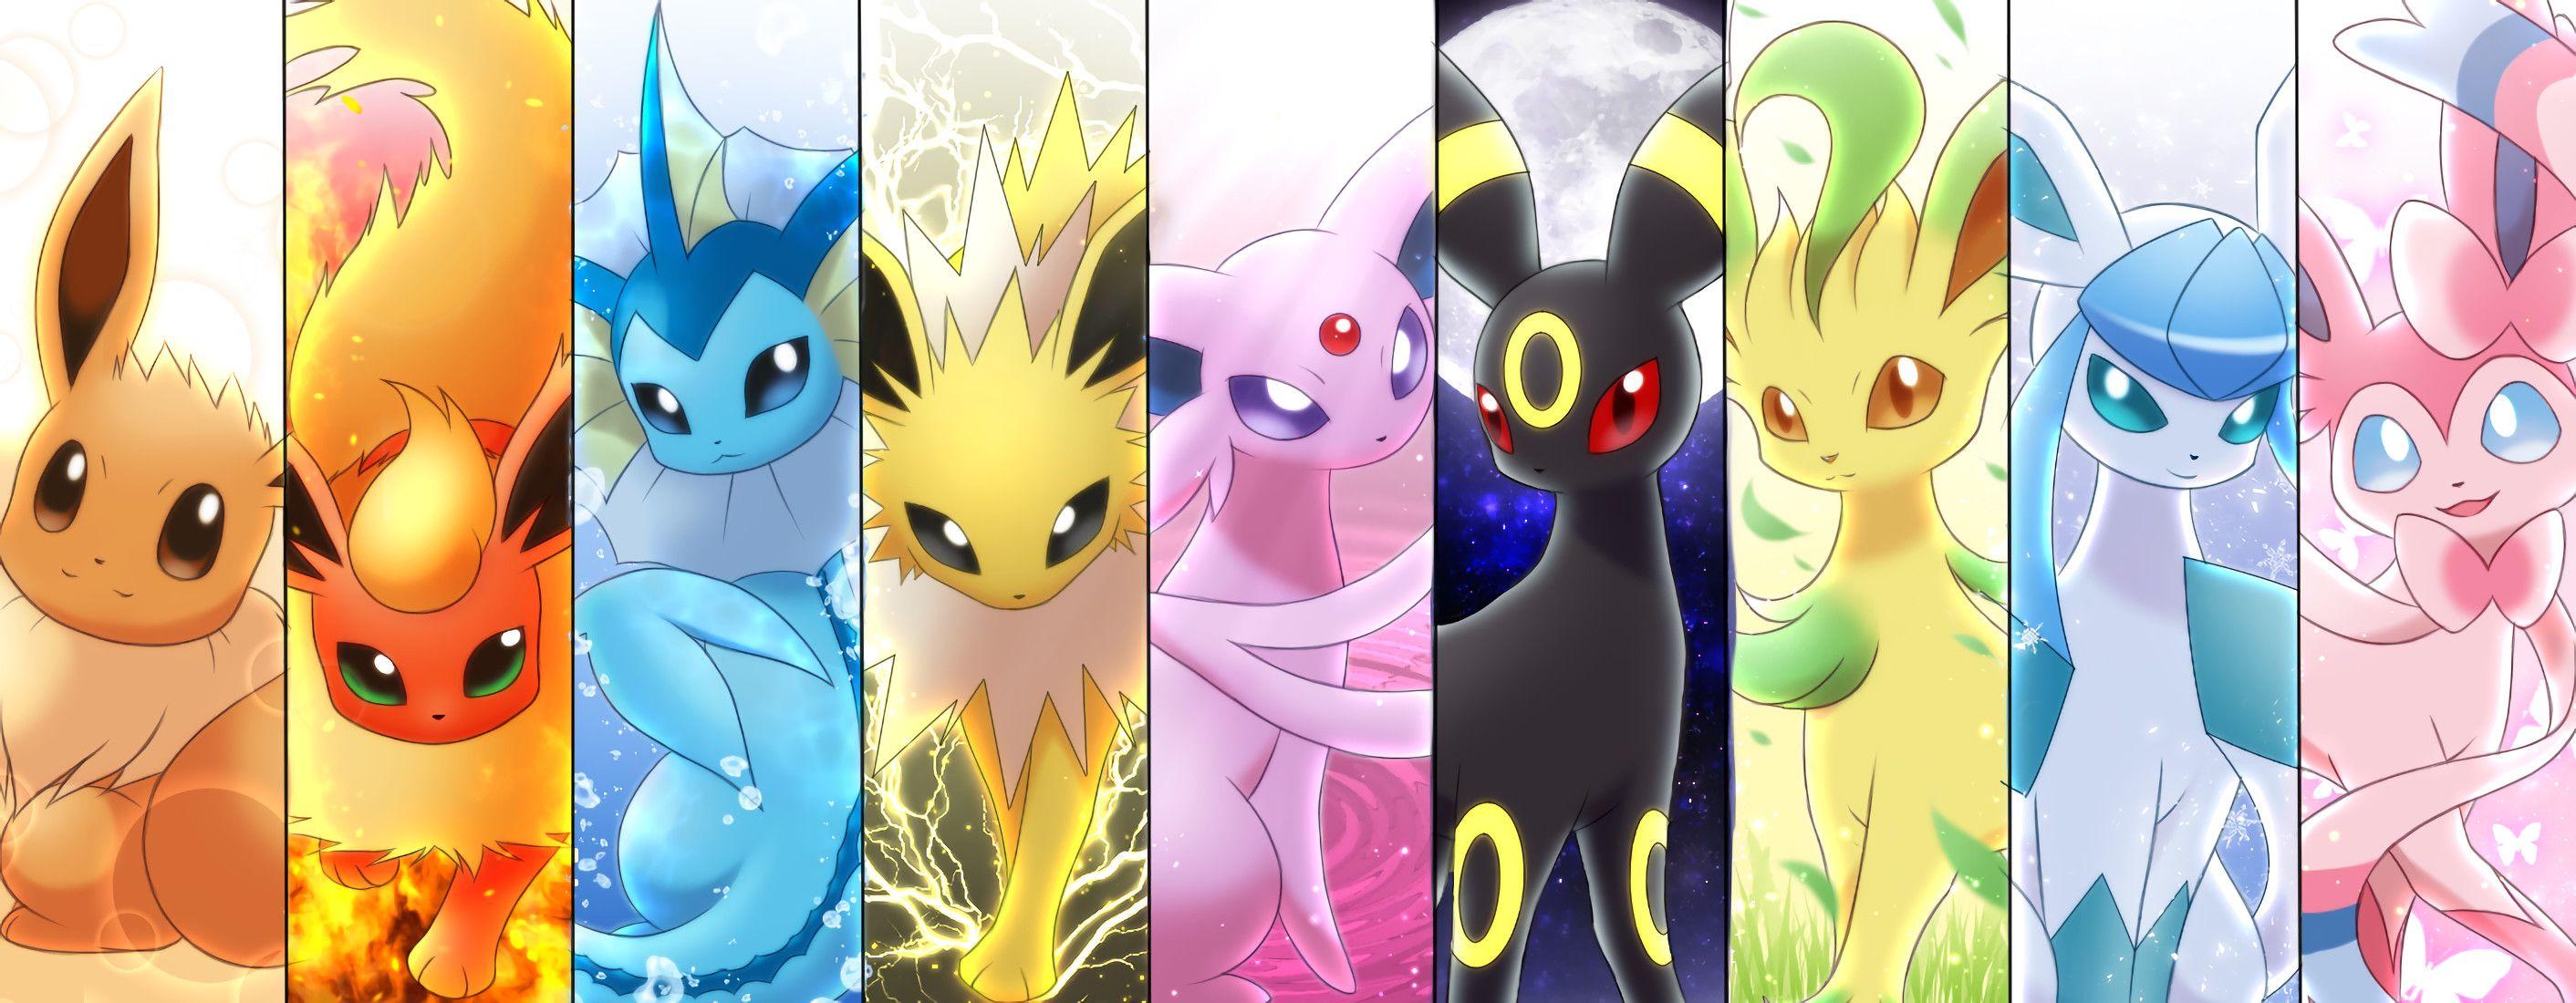 Download Get Ready To Fall In Love With These Cute Eeveelutions Wallpaper   Wallpaperscom